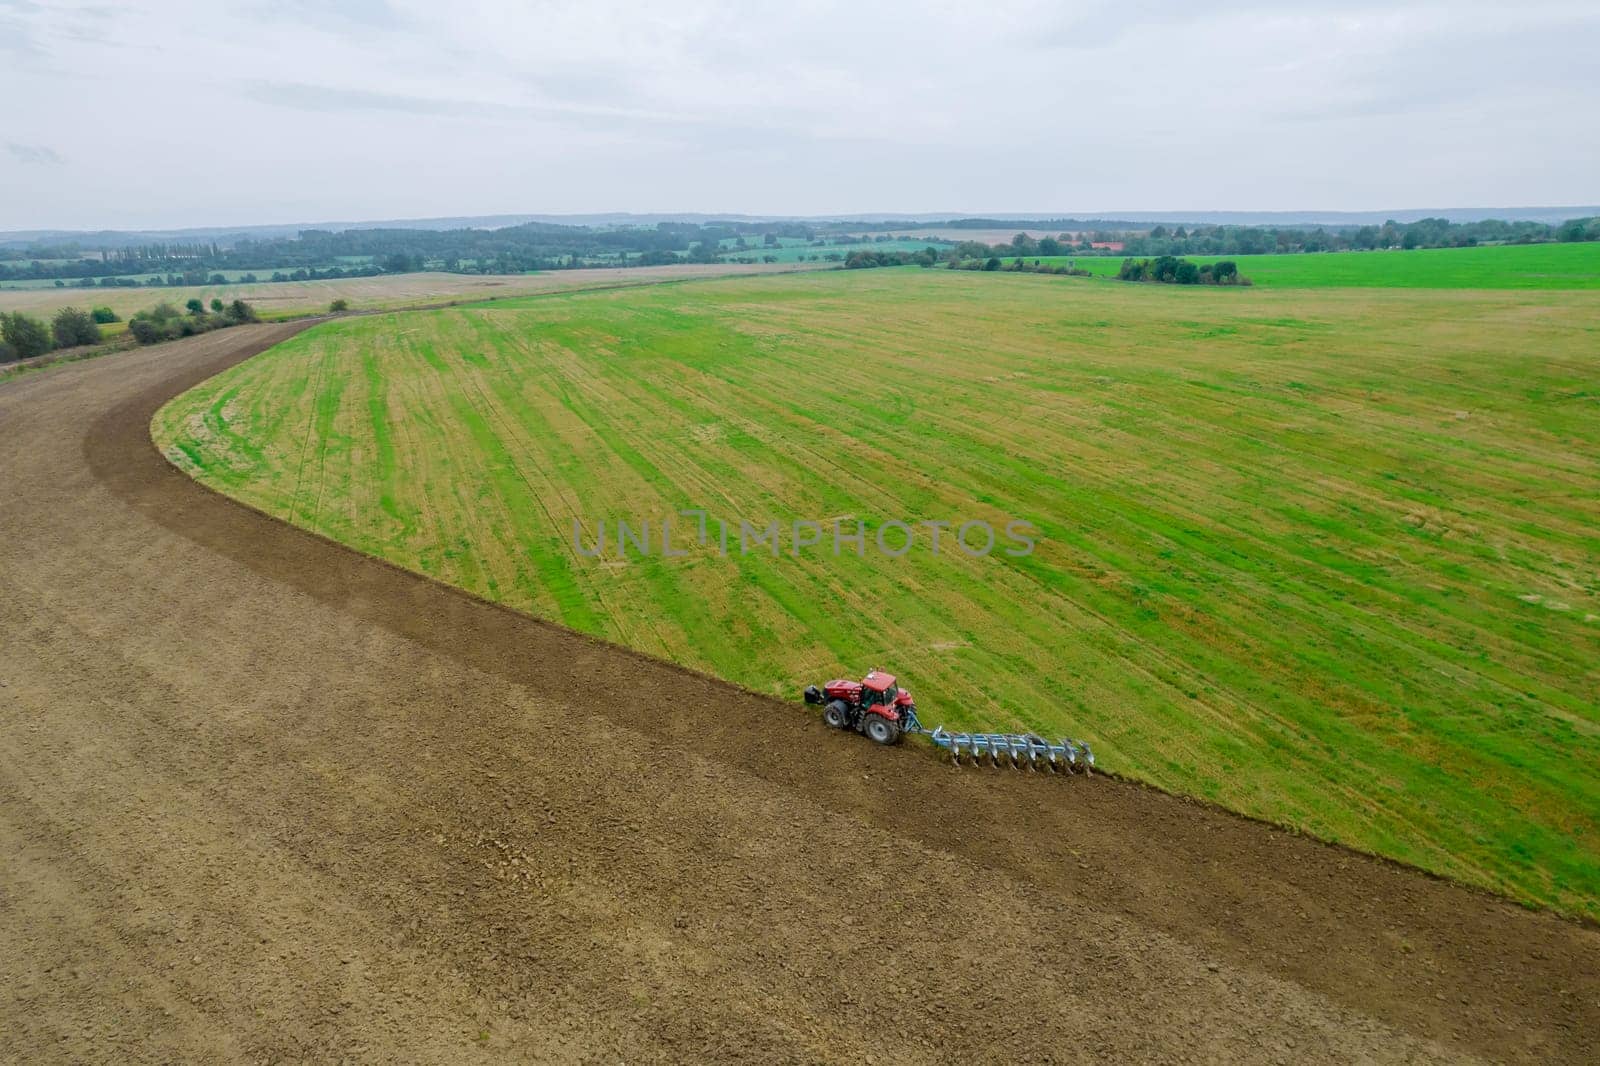 A red tractor plows the land sown with green manure on a near field the railway. Agricultural industry. View from above.